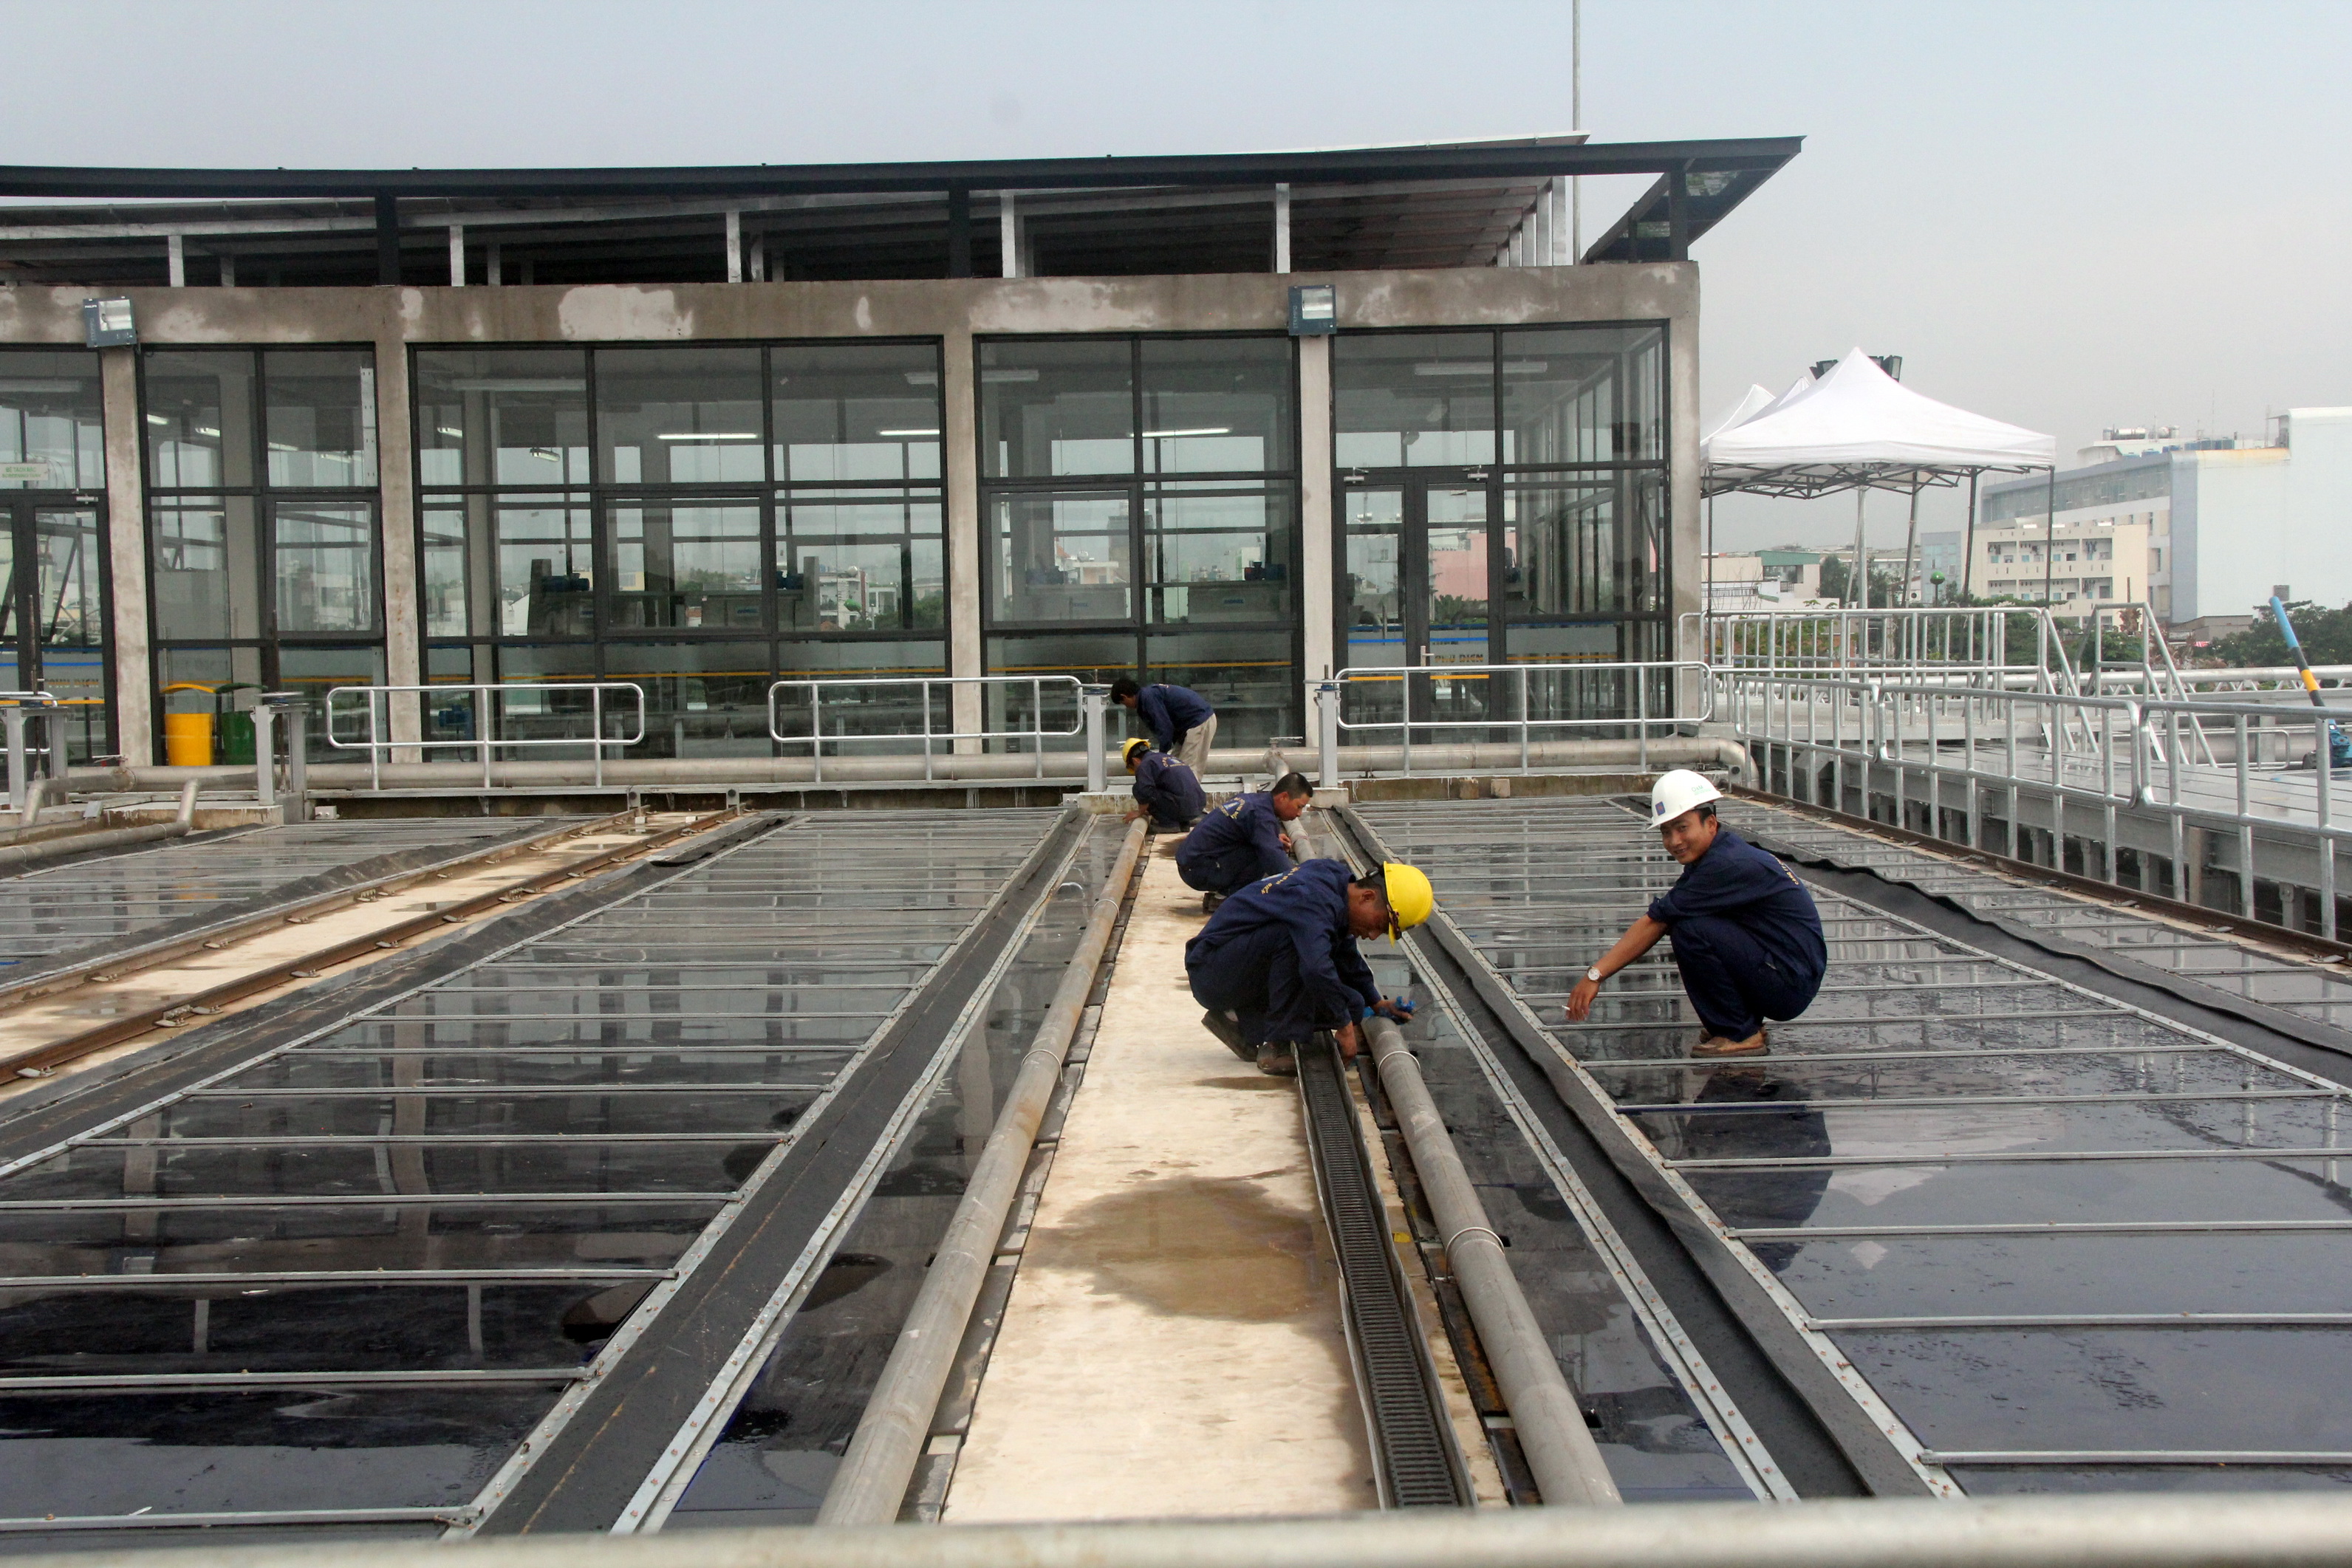 Employees examine the wastewater treatment process at the facility. Photo: Tuoi Tre